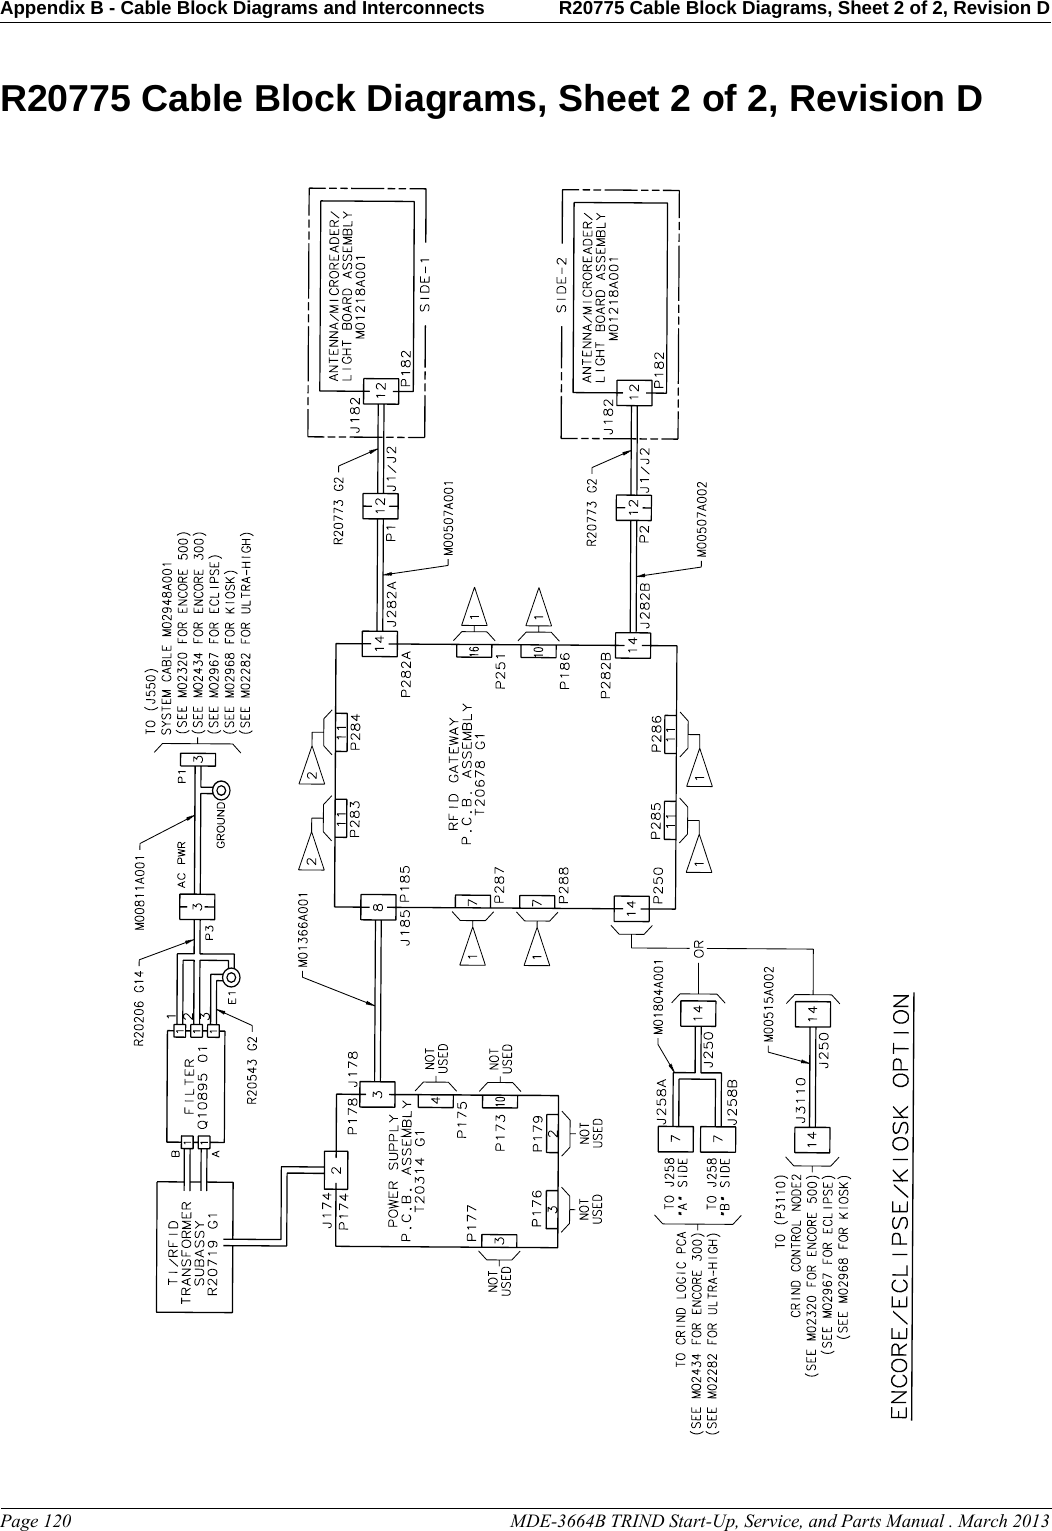 Appendix B - Cable Block Diagrams and Interconnects R20775 Cable Block Diagrams, Sheet 2 of 2, Revision DPage 120                                                                                                  MDE-3664B TRIND Start-Up, Service, and Parts Manual . March 2013PreliminaryR20775 Cable Block Diagrams, Sheet 2 of 2, Revision D